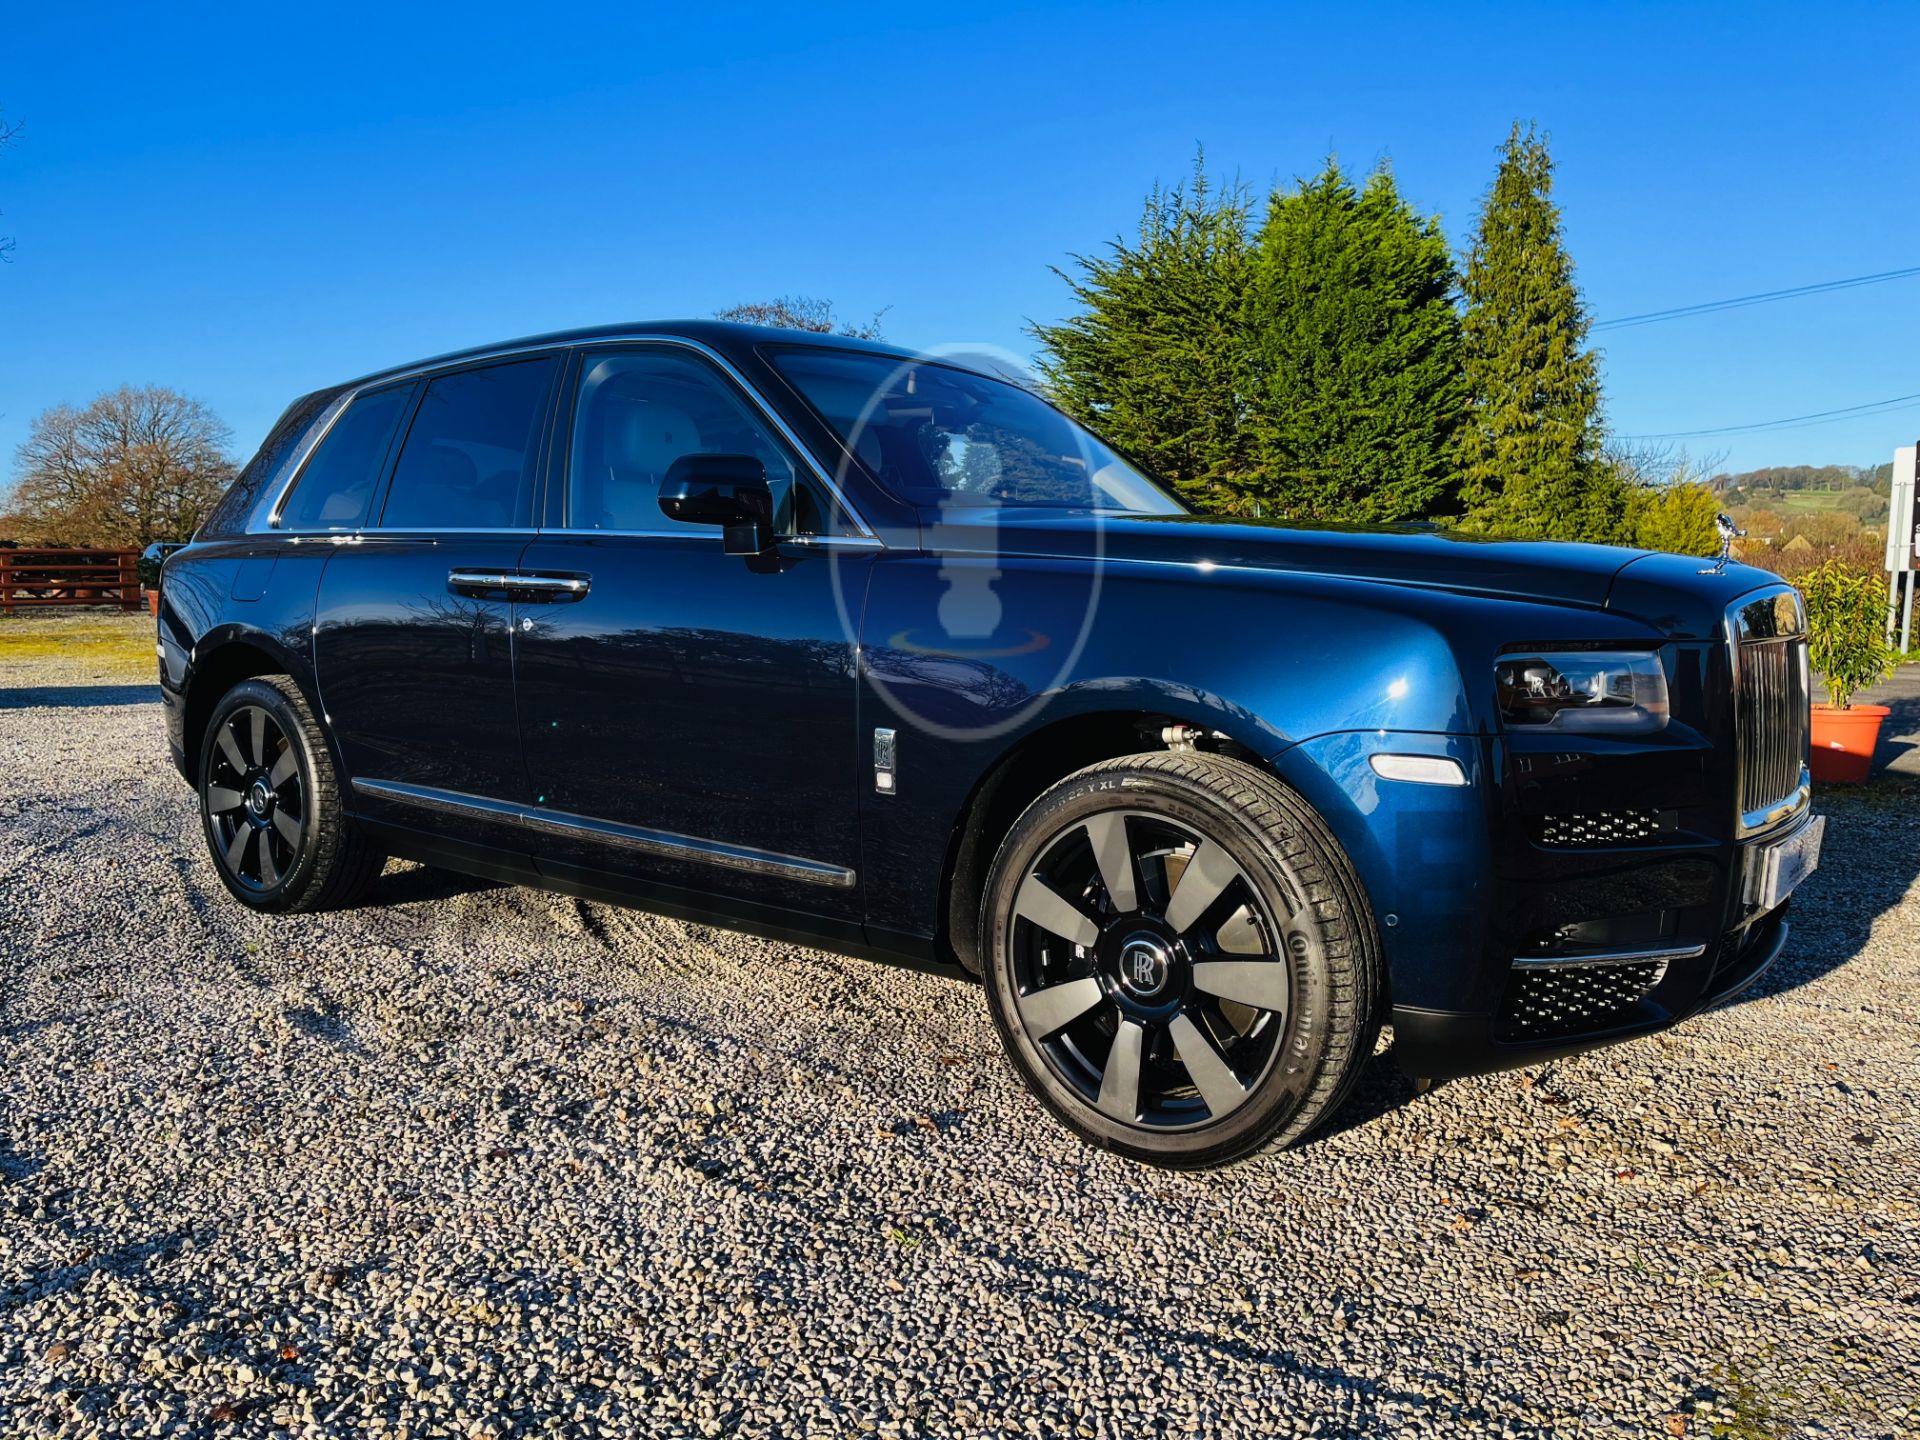 ROLLS ROYCE CULLINAN SILVER BADGE V12 6.75L (23 REG) ULTIMATE LUXURY SUV - ONLY 2100 MILES -MUST SEE - Image 11 of 61